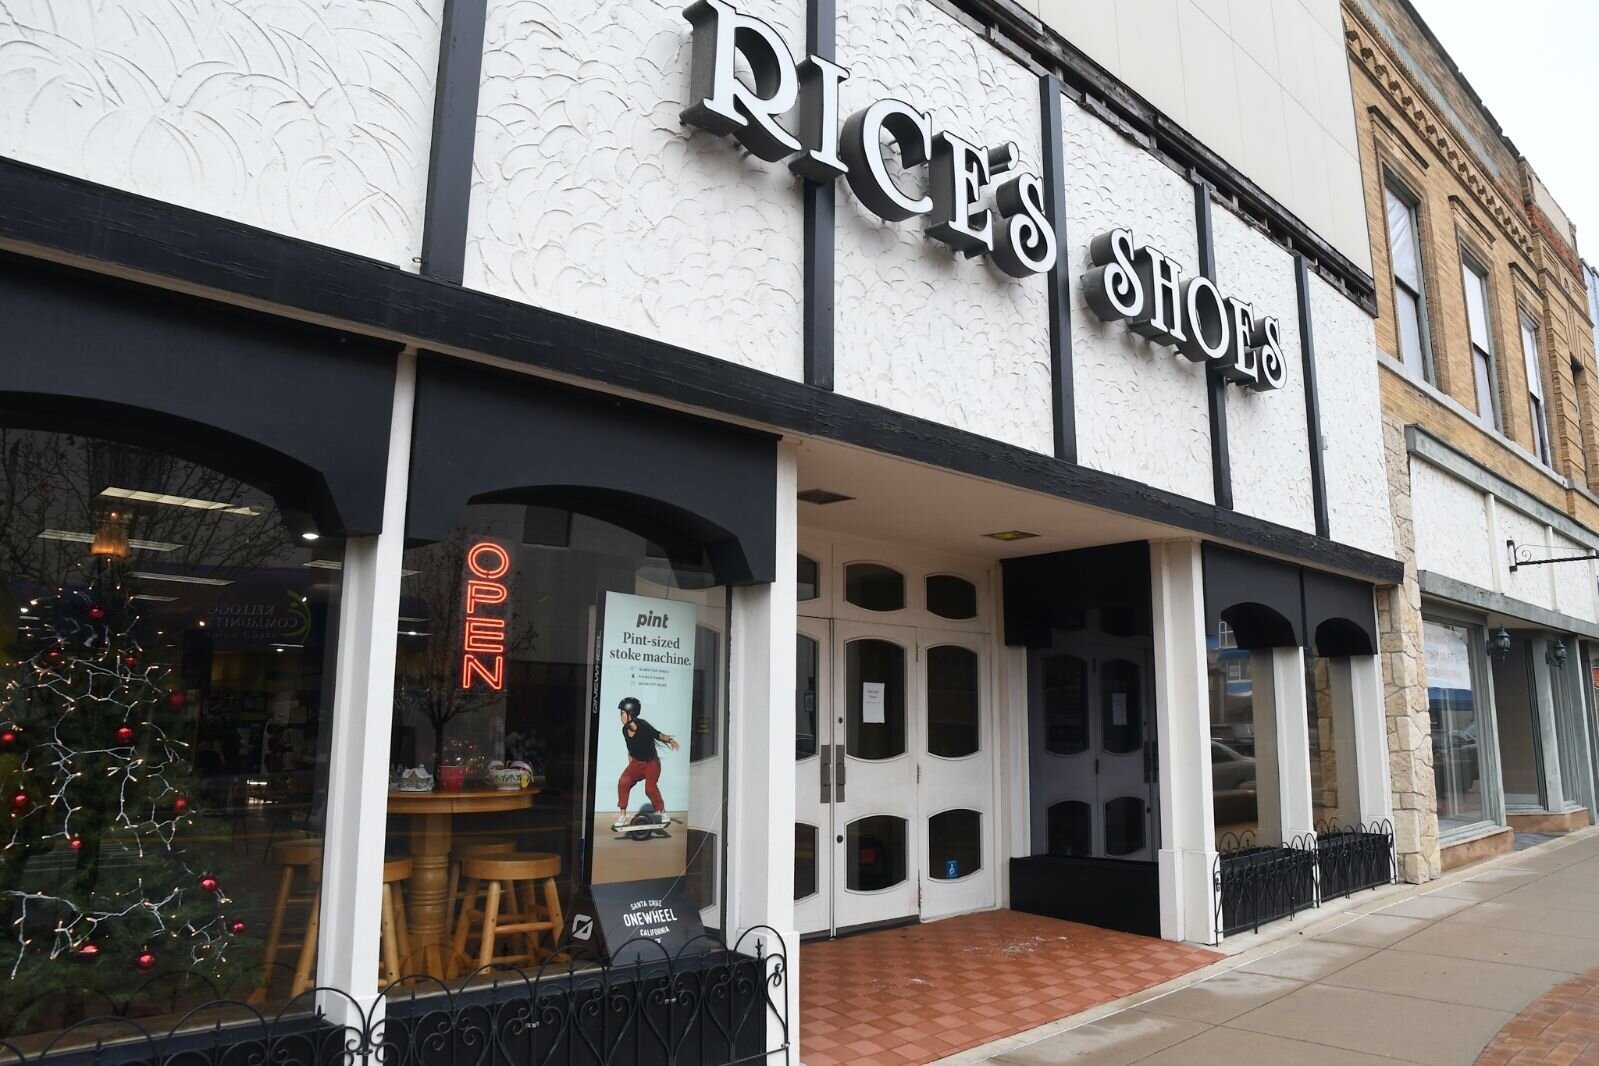  Rice’s Shoes is 62 W. Michigan in downtown Battle Creek